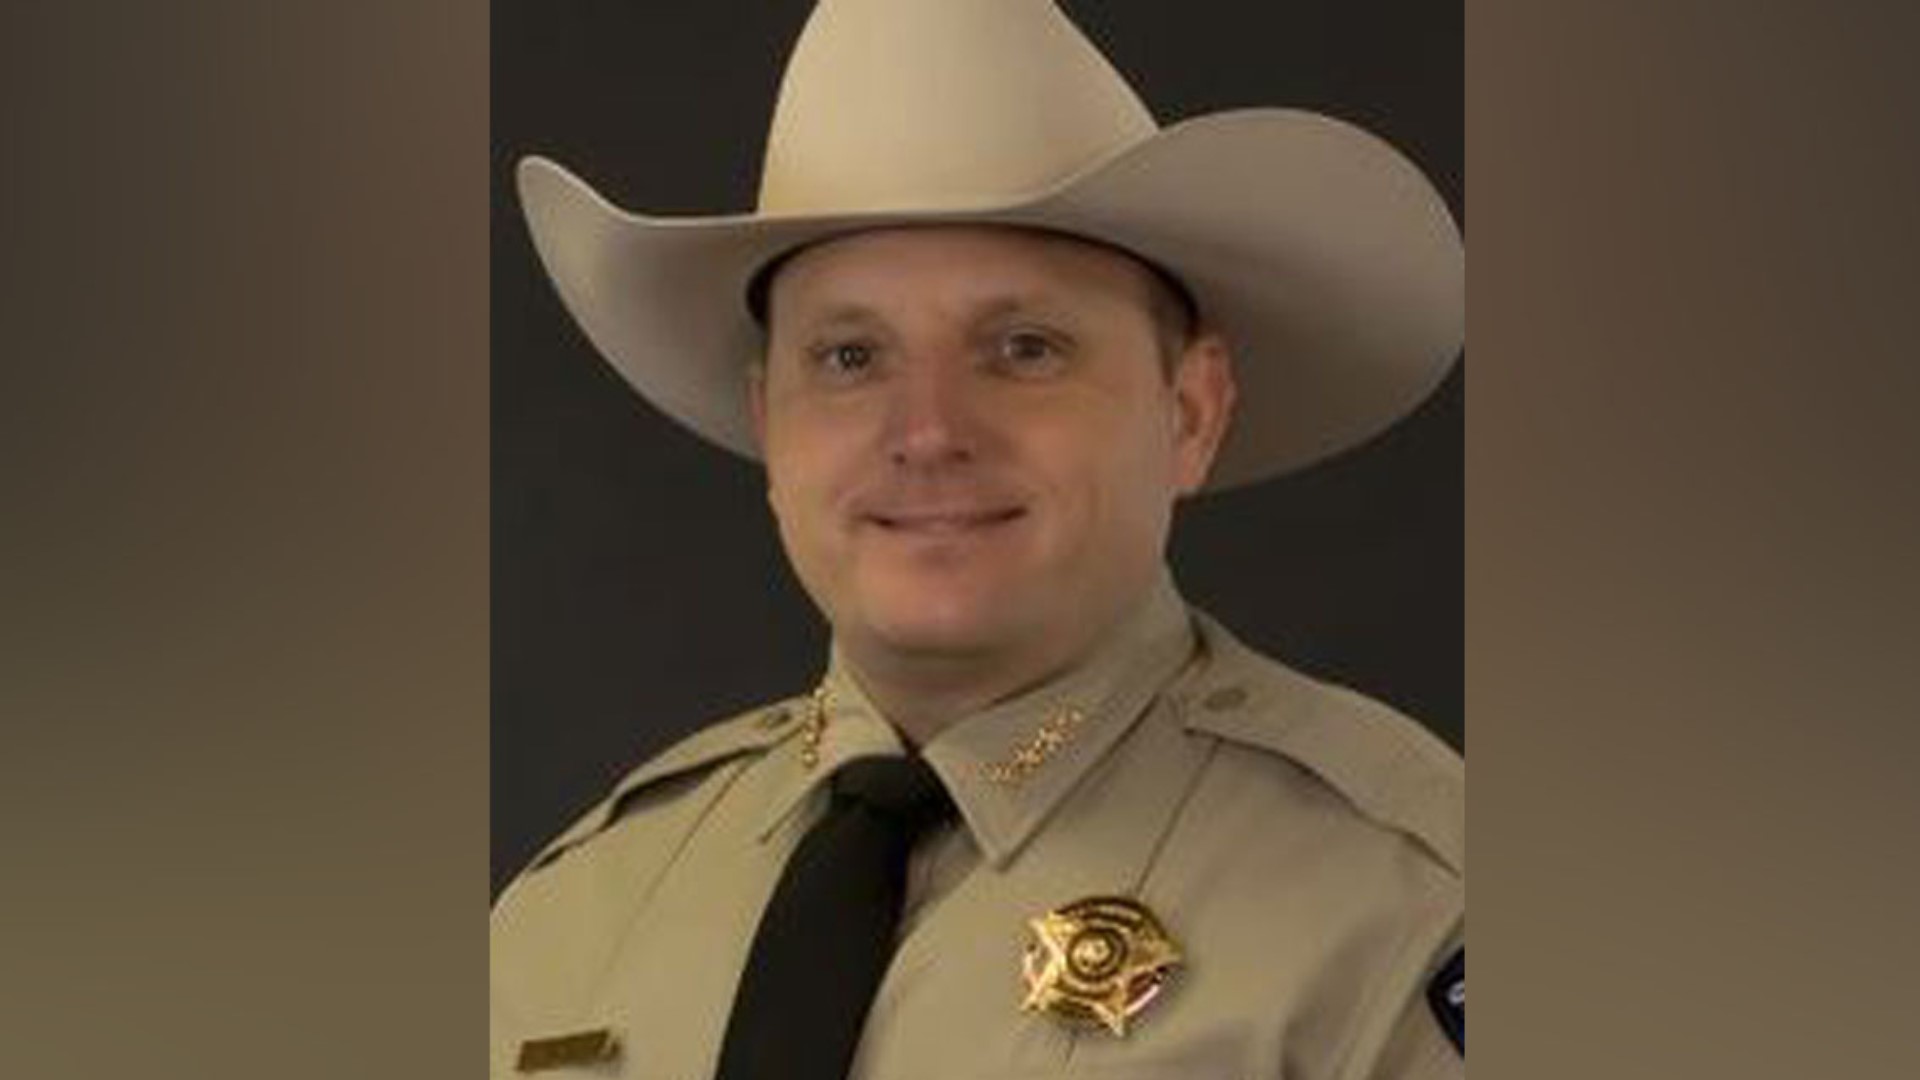 Robert Chody is seeking a second term. Before becoming sheriff, he served as an elected Williamson County constable and a patrol officer for APD.